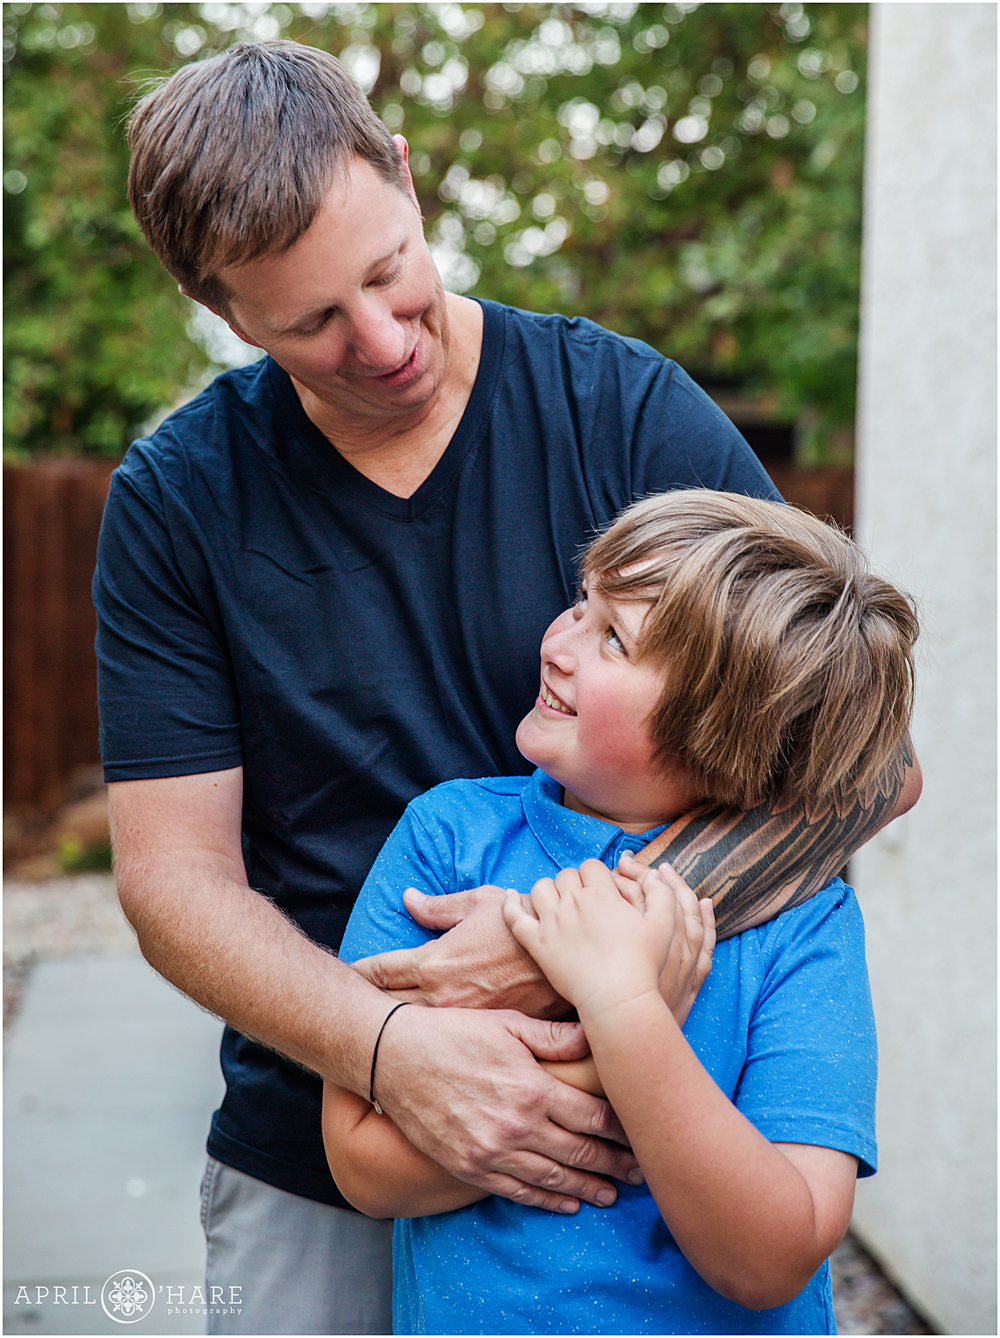 Dad with his son at their family home portrait session in Colorado